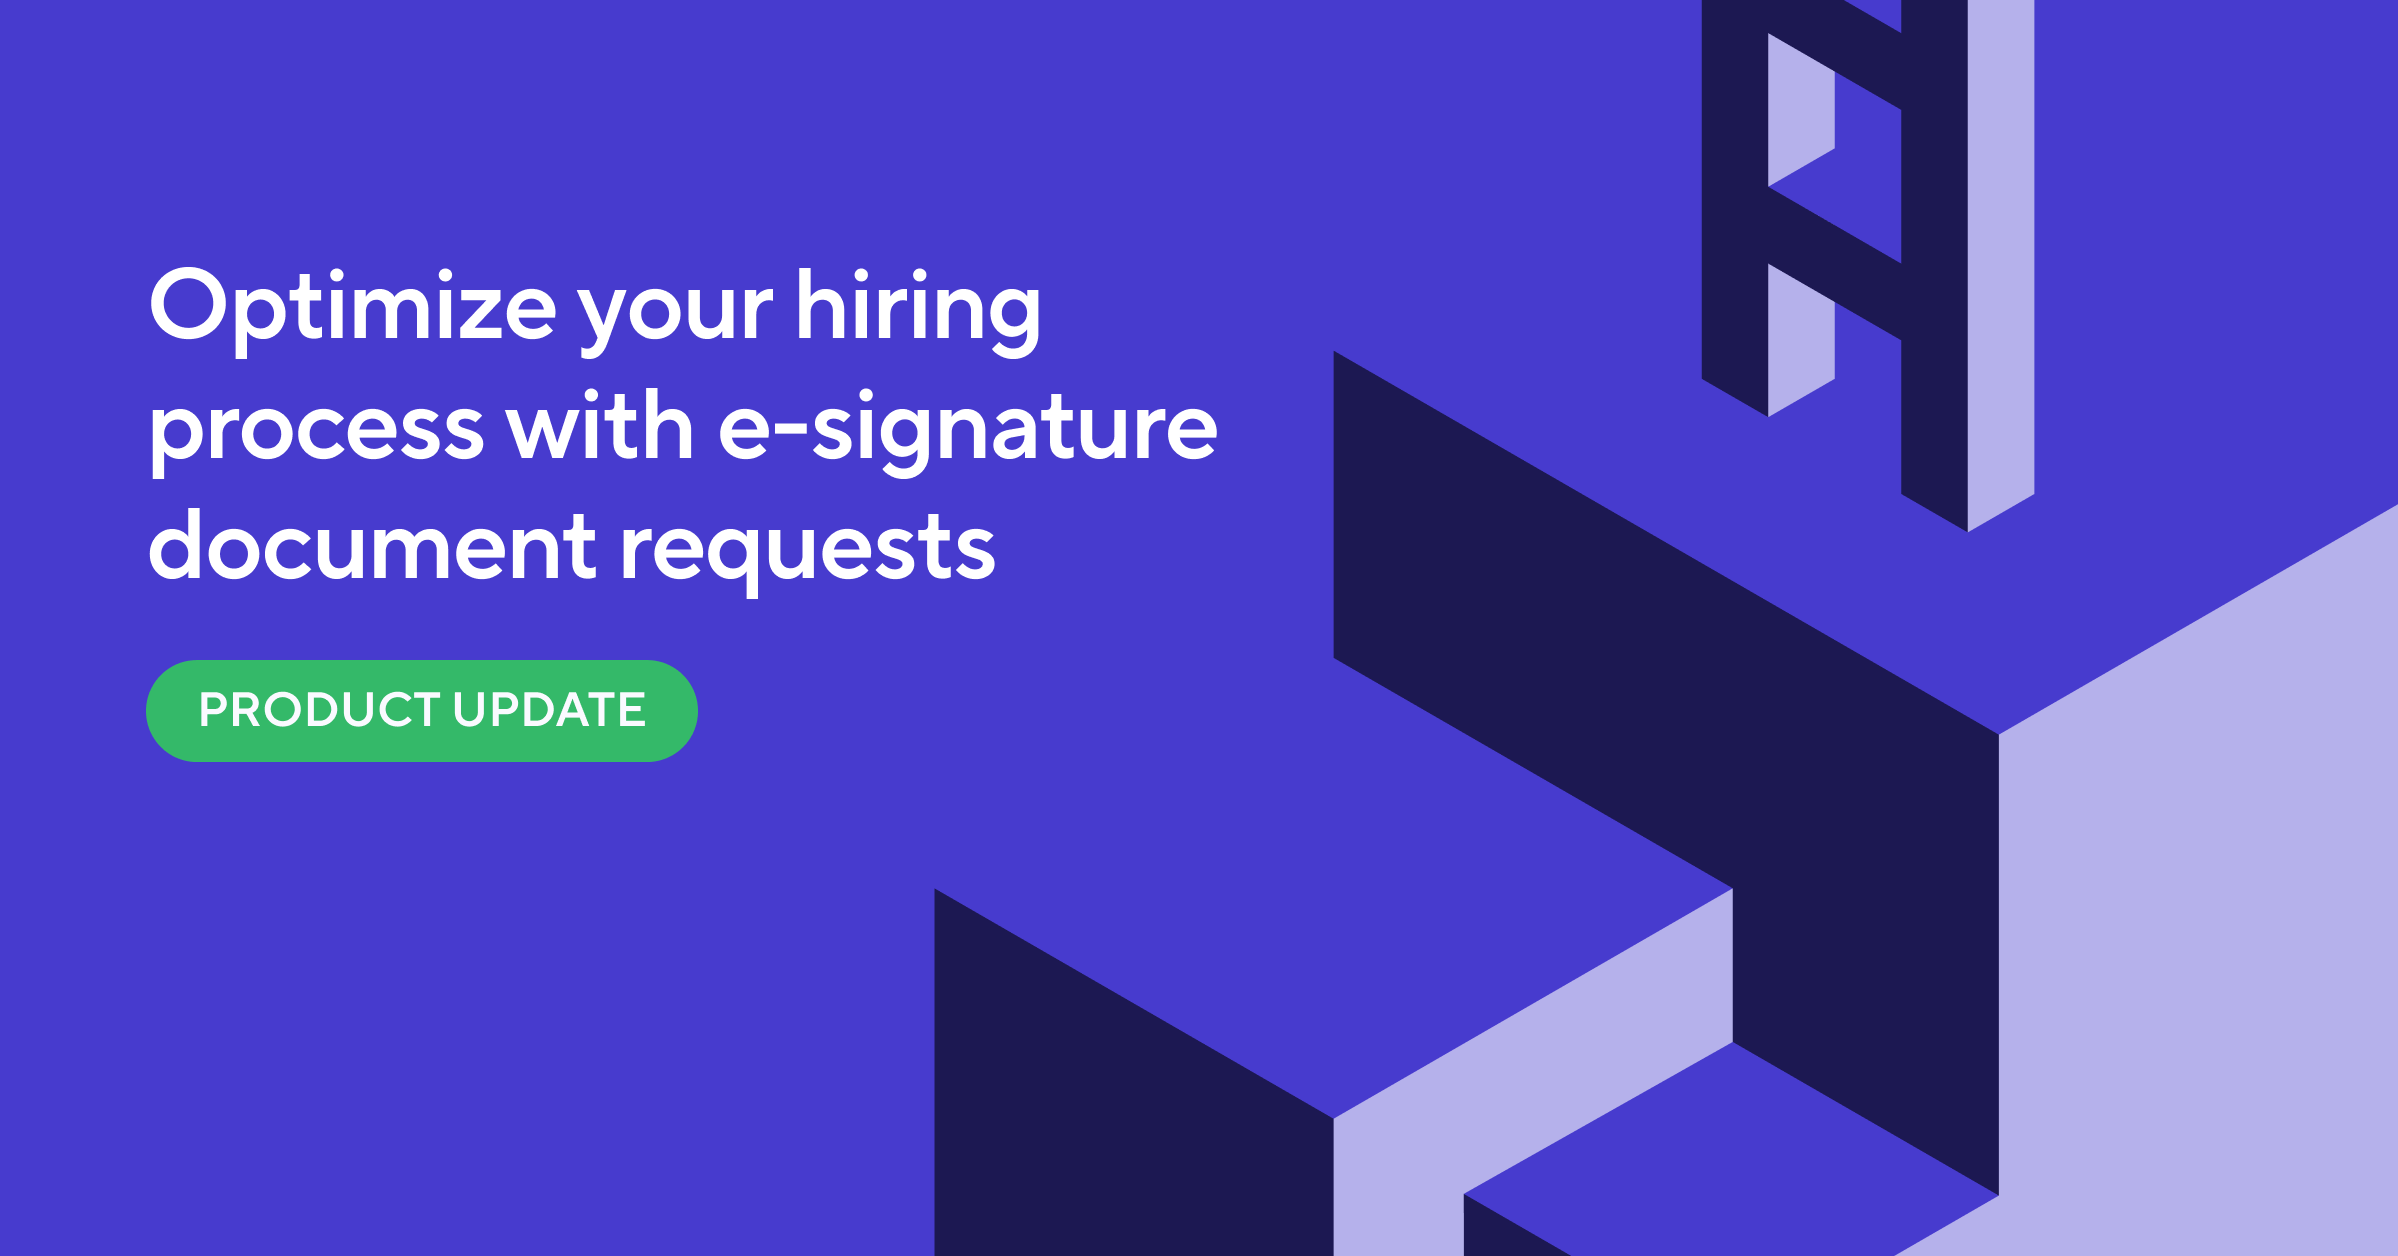 New Feature: Send E-signature Document Requests Directly from Ashby